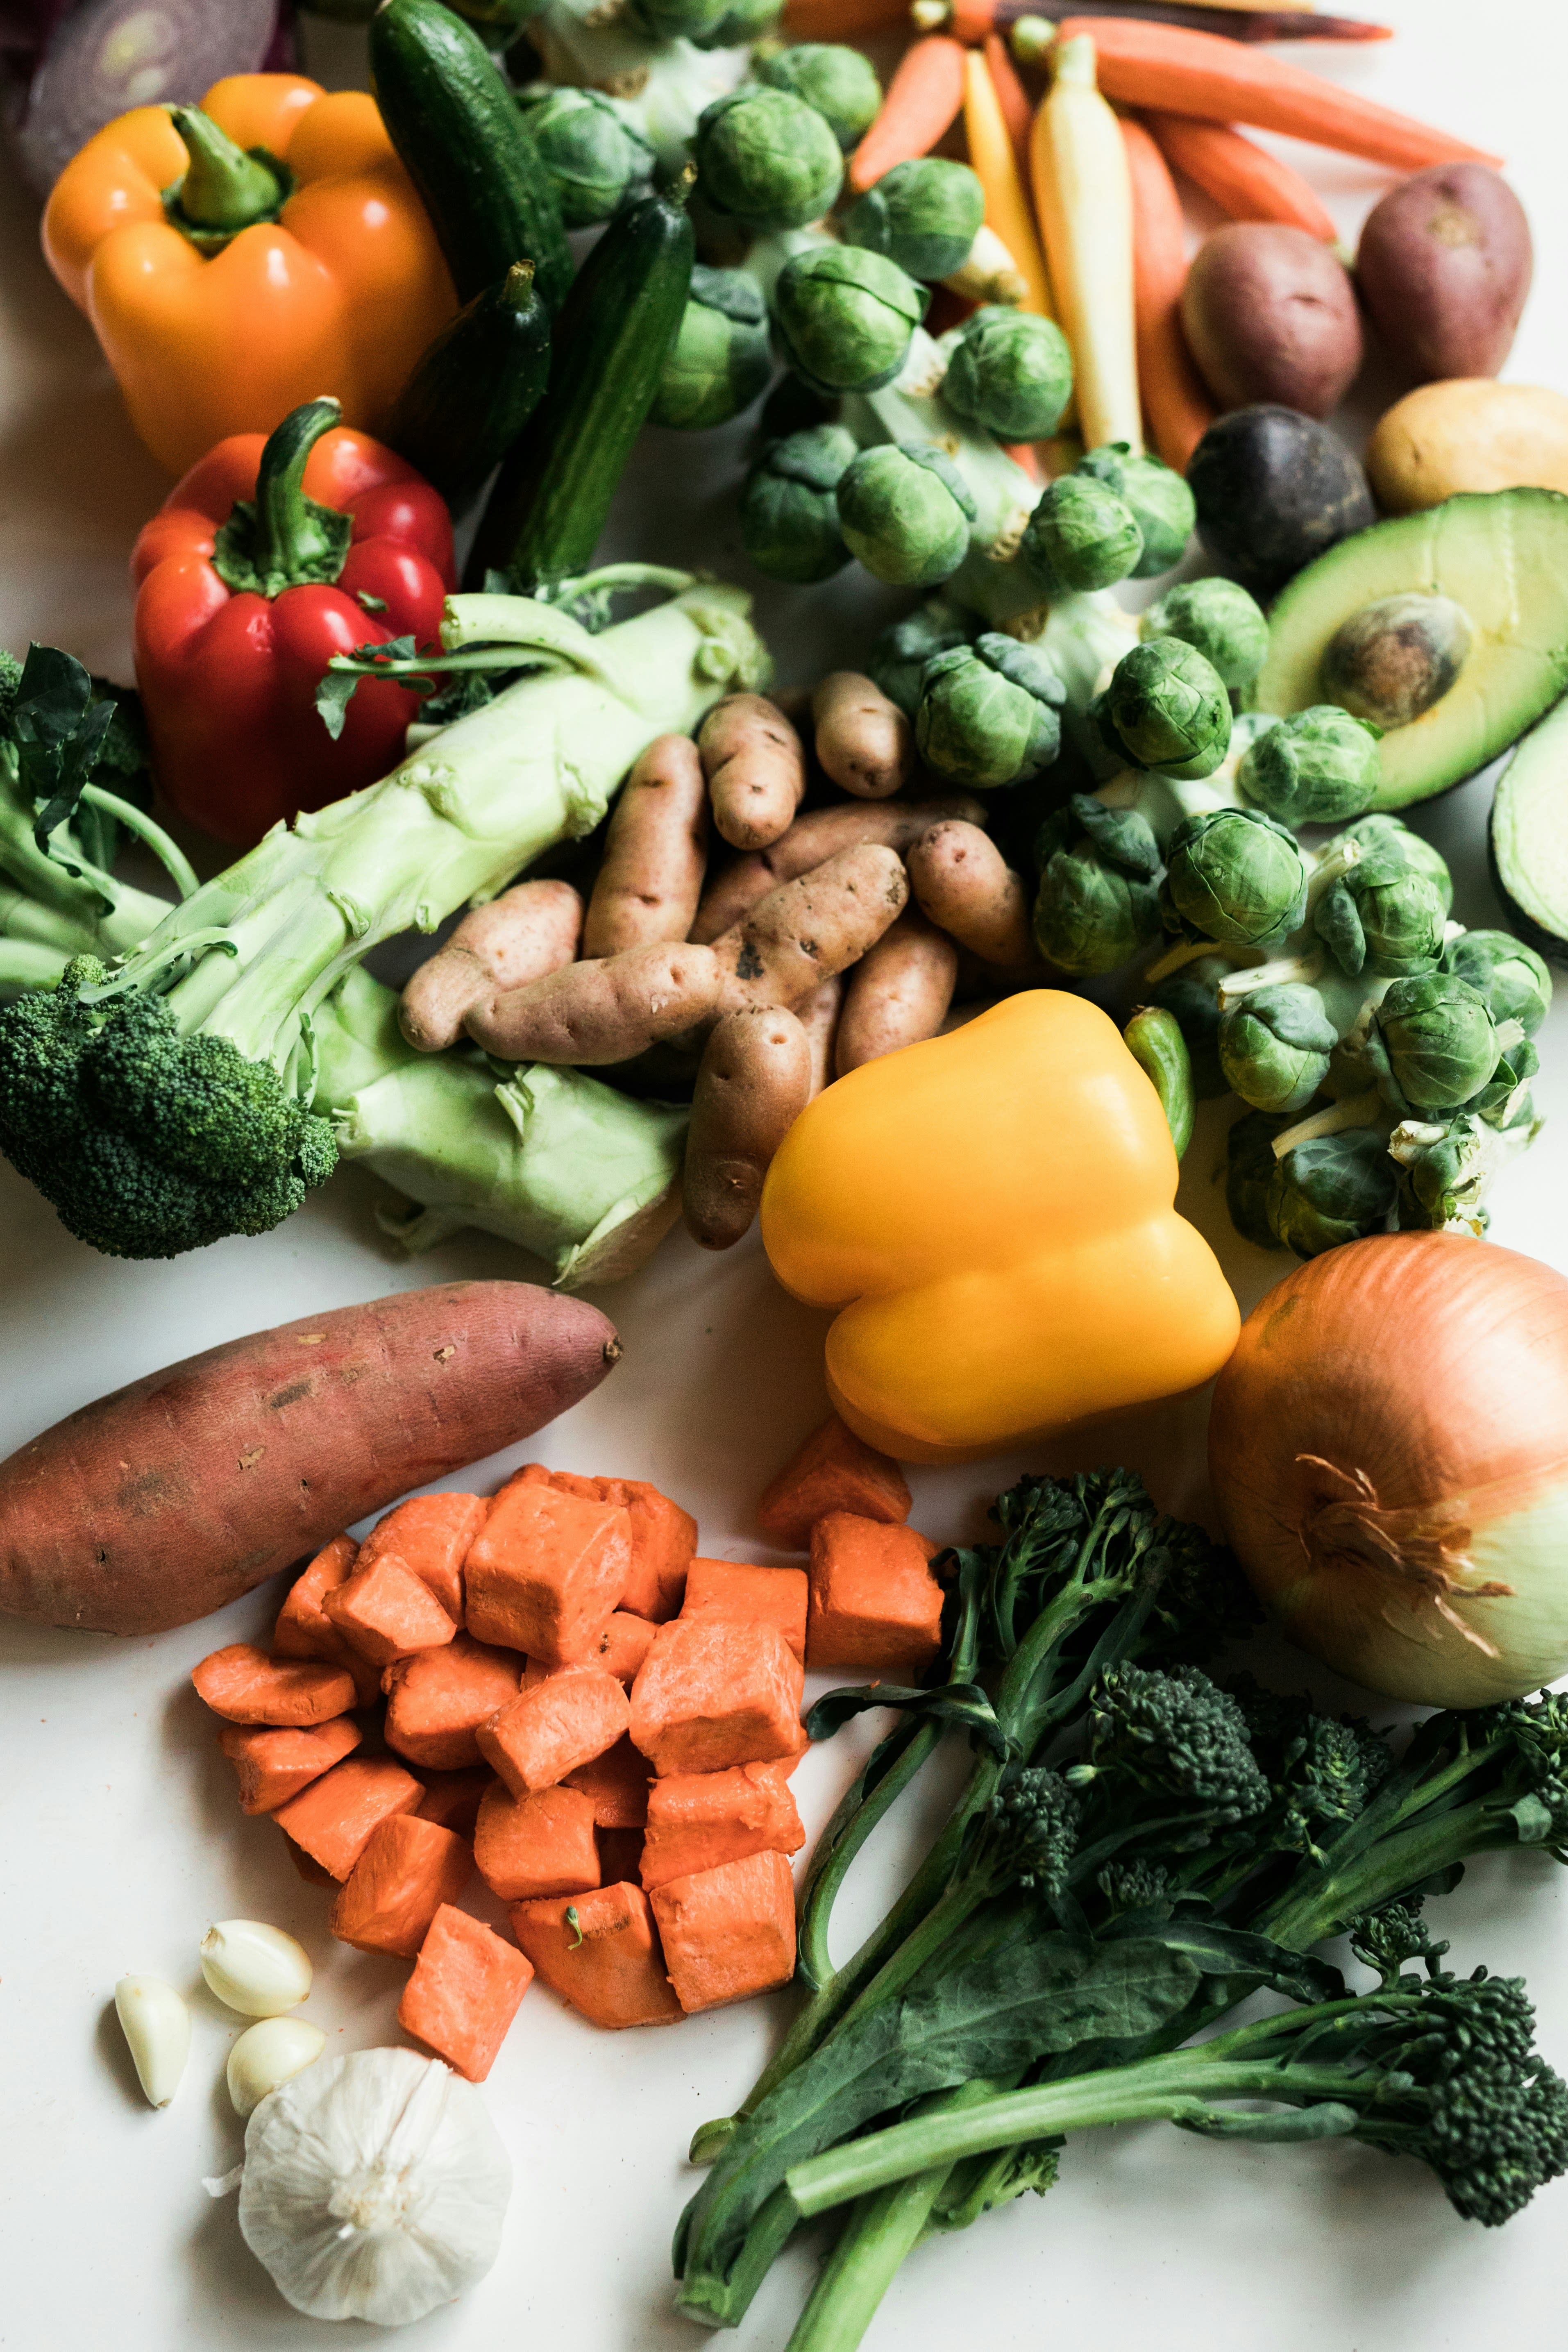 What Ingredients Should you Include in a Vegetarian Diet?